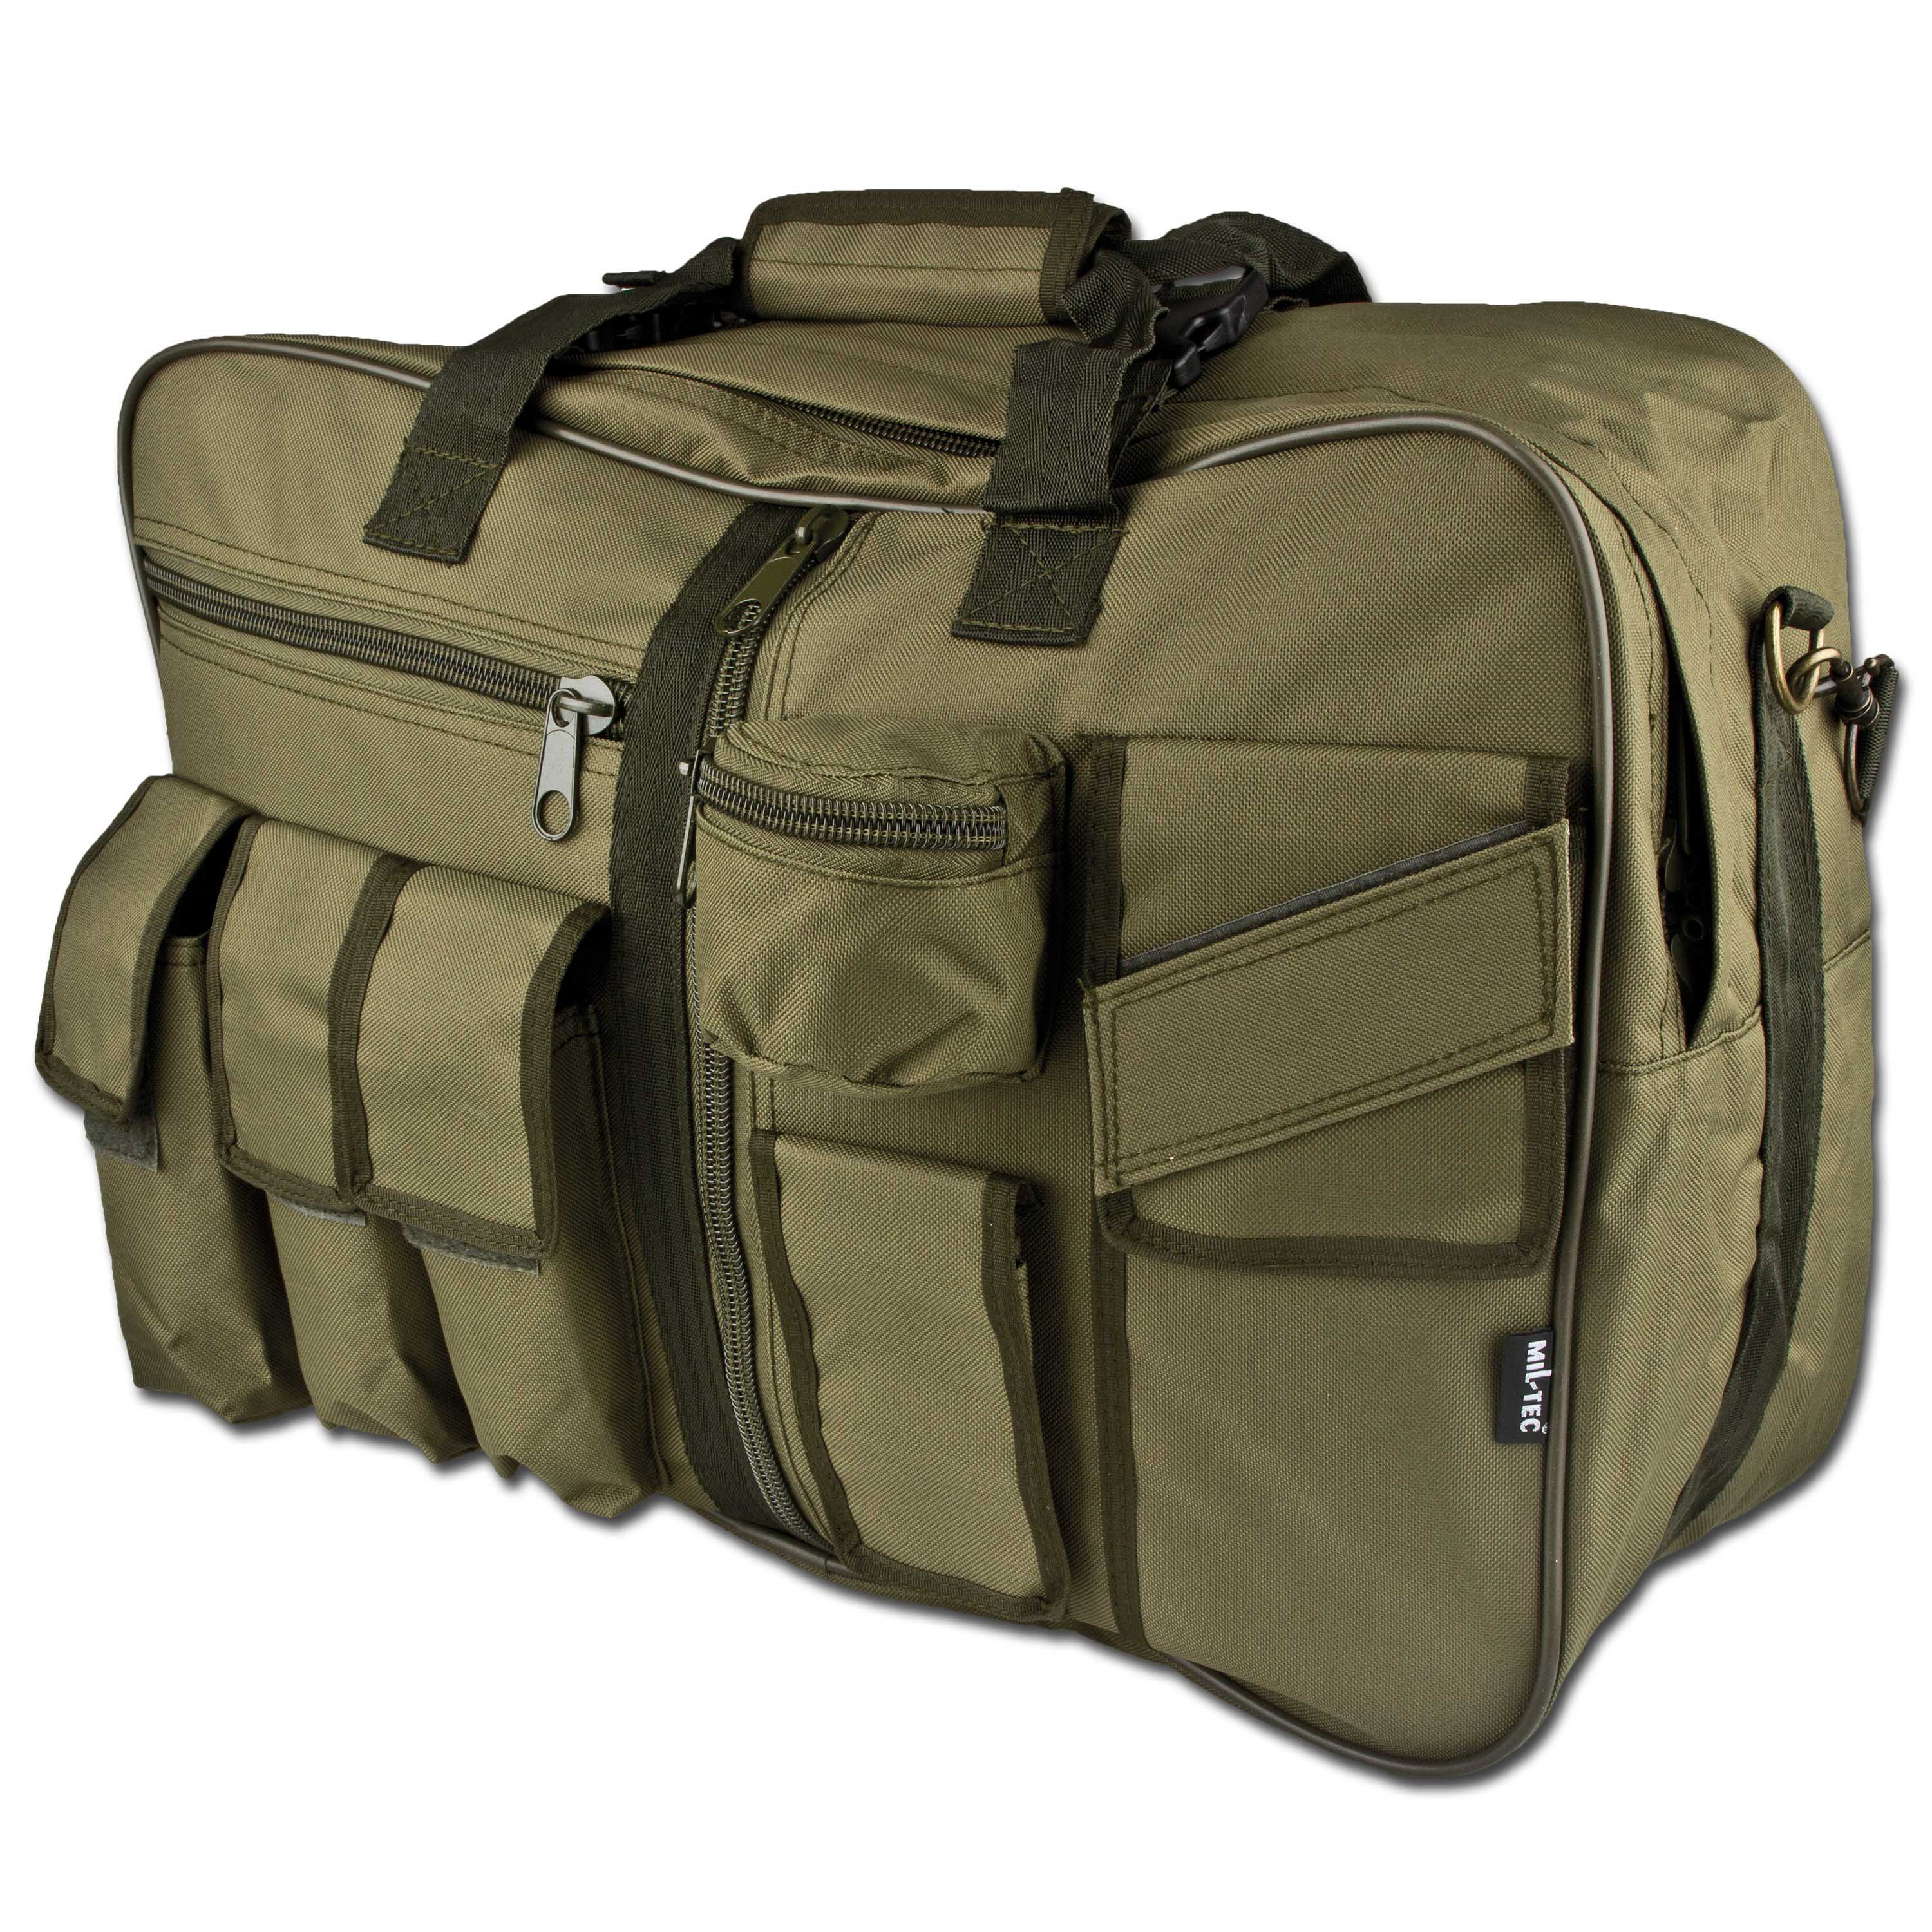 Purchase the Mil-Tec Cargo Bag olive green by ASMC